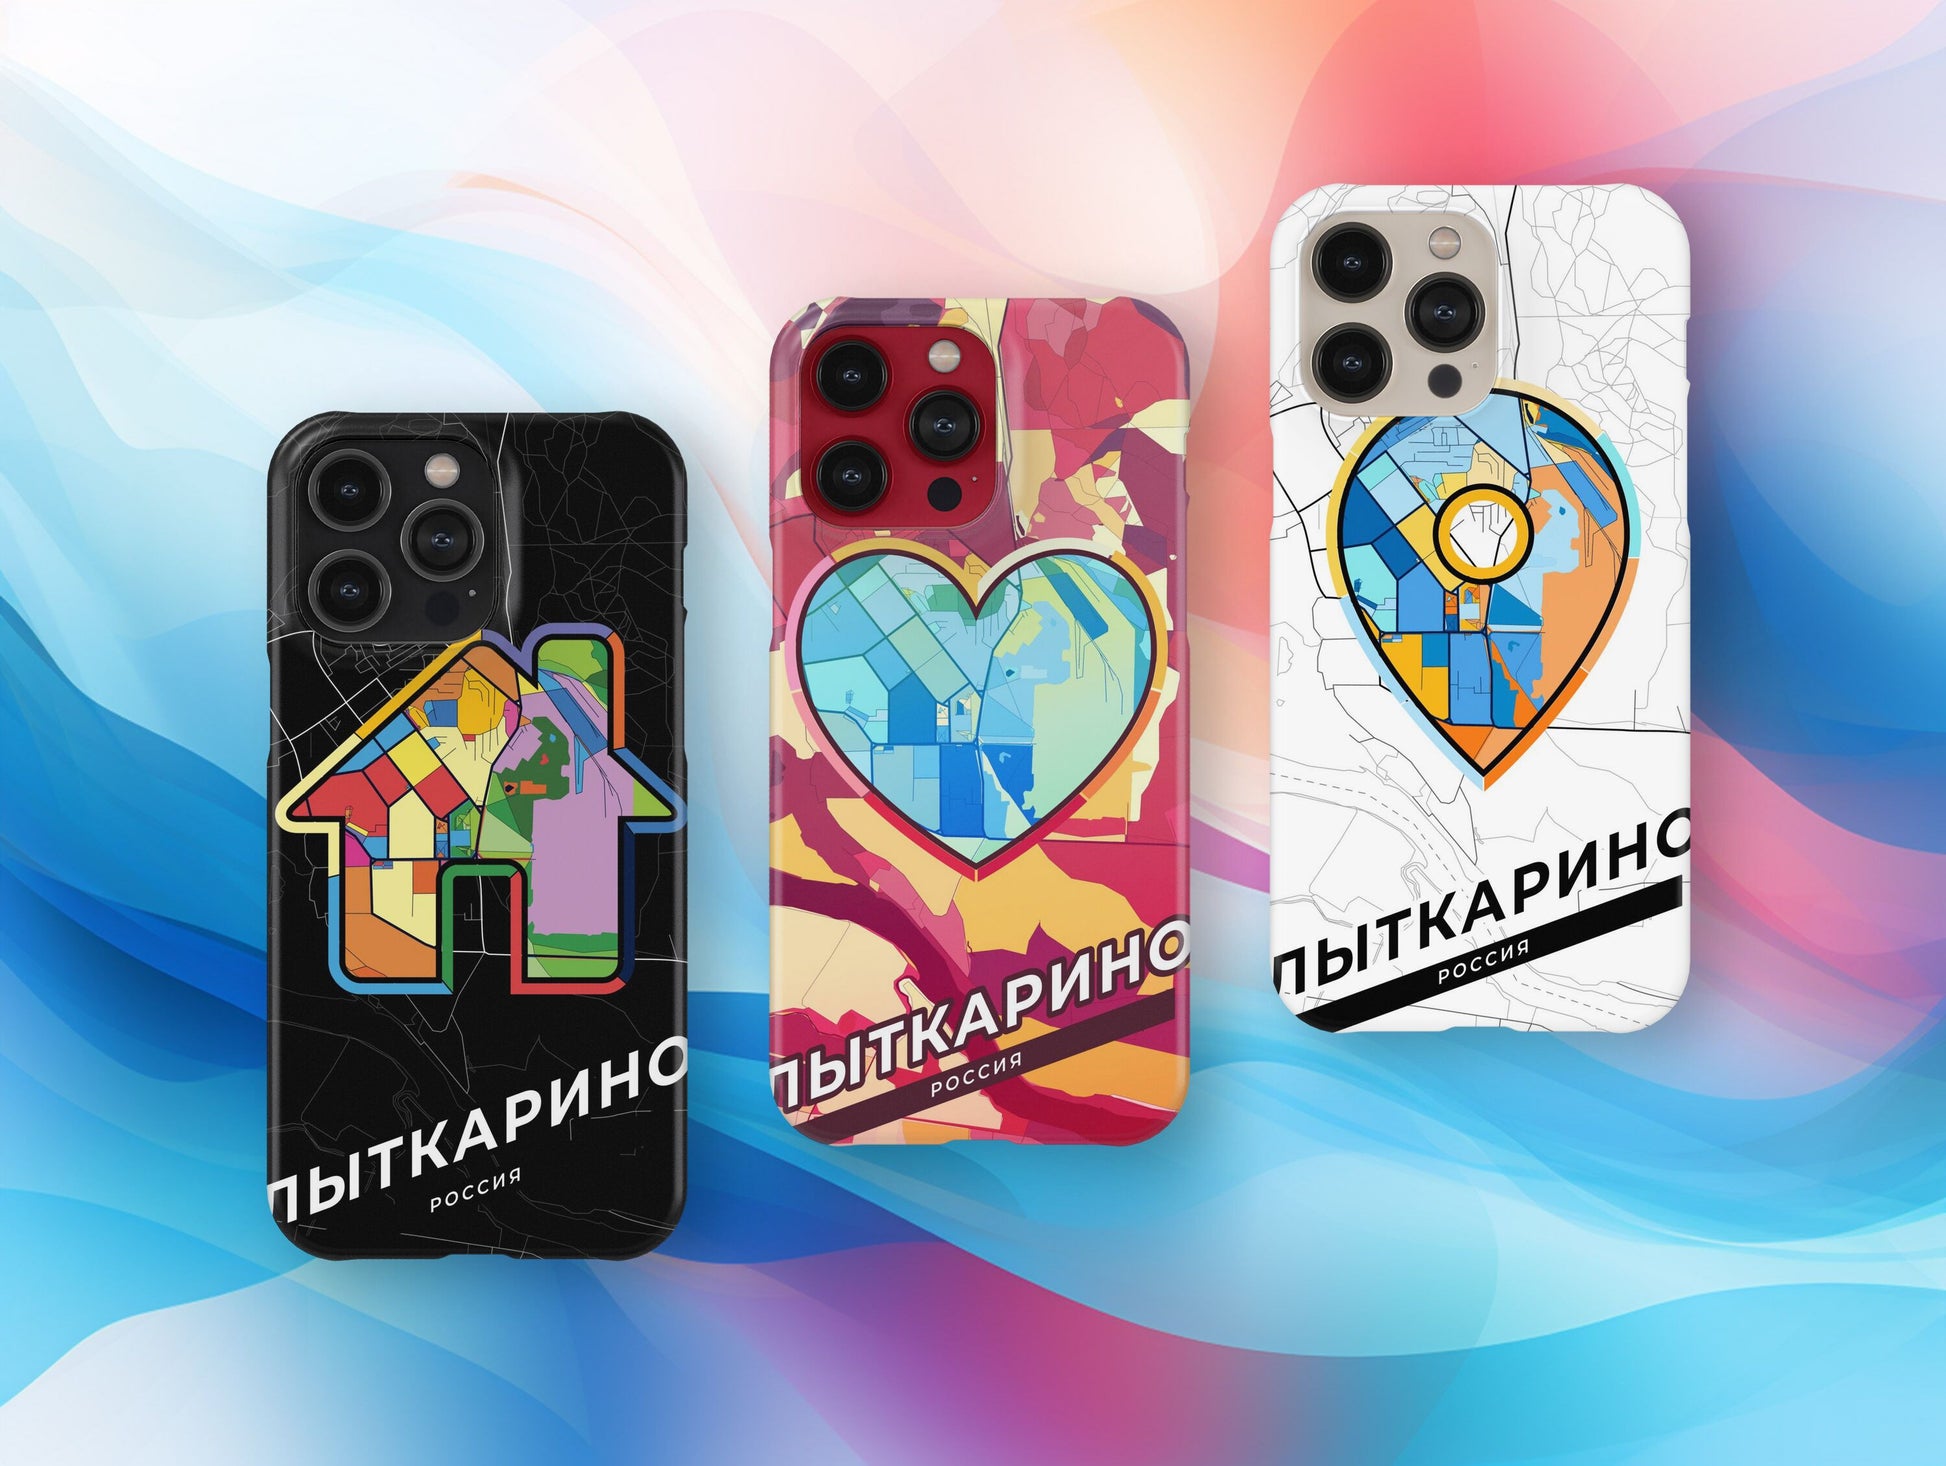 Lytkarino Russia slim phone case with colorful icon. Birthday, wedding or housewarming gift. Couple match cases.